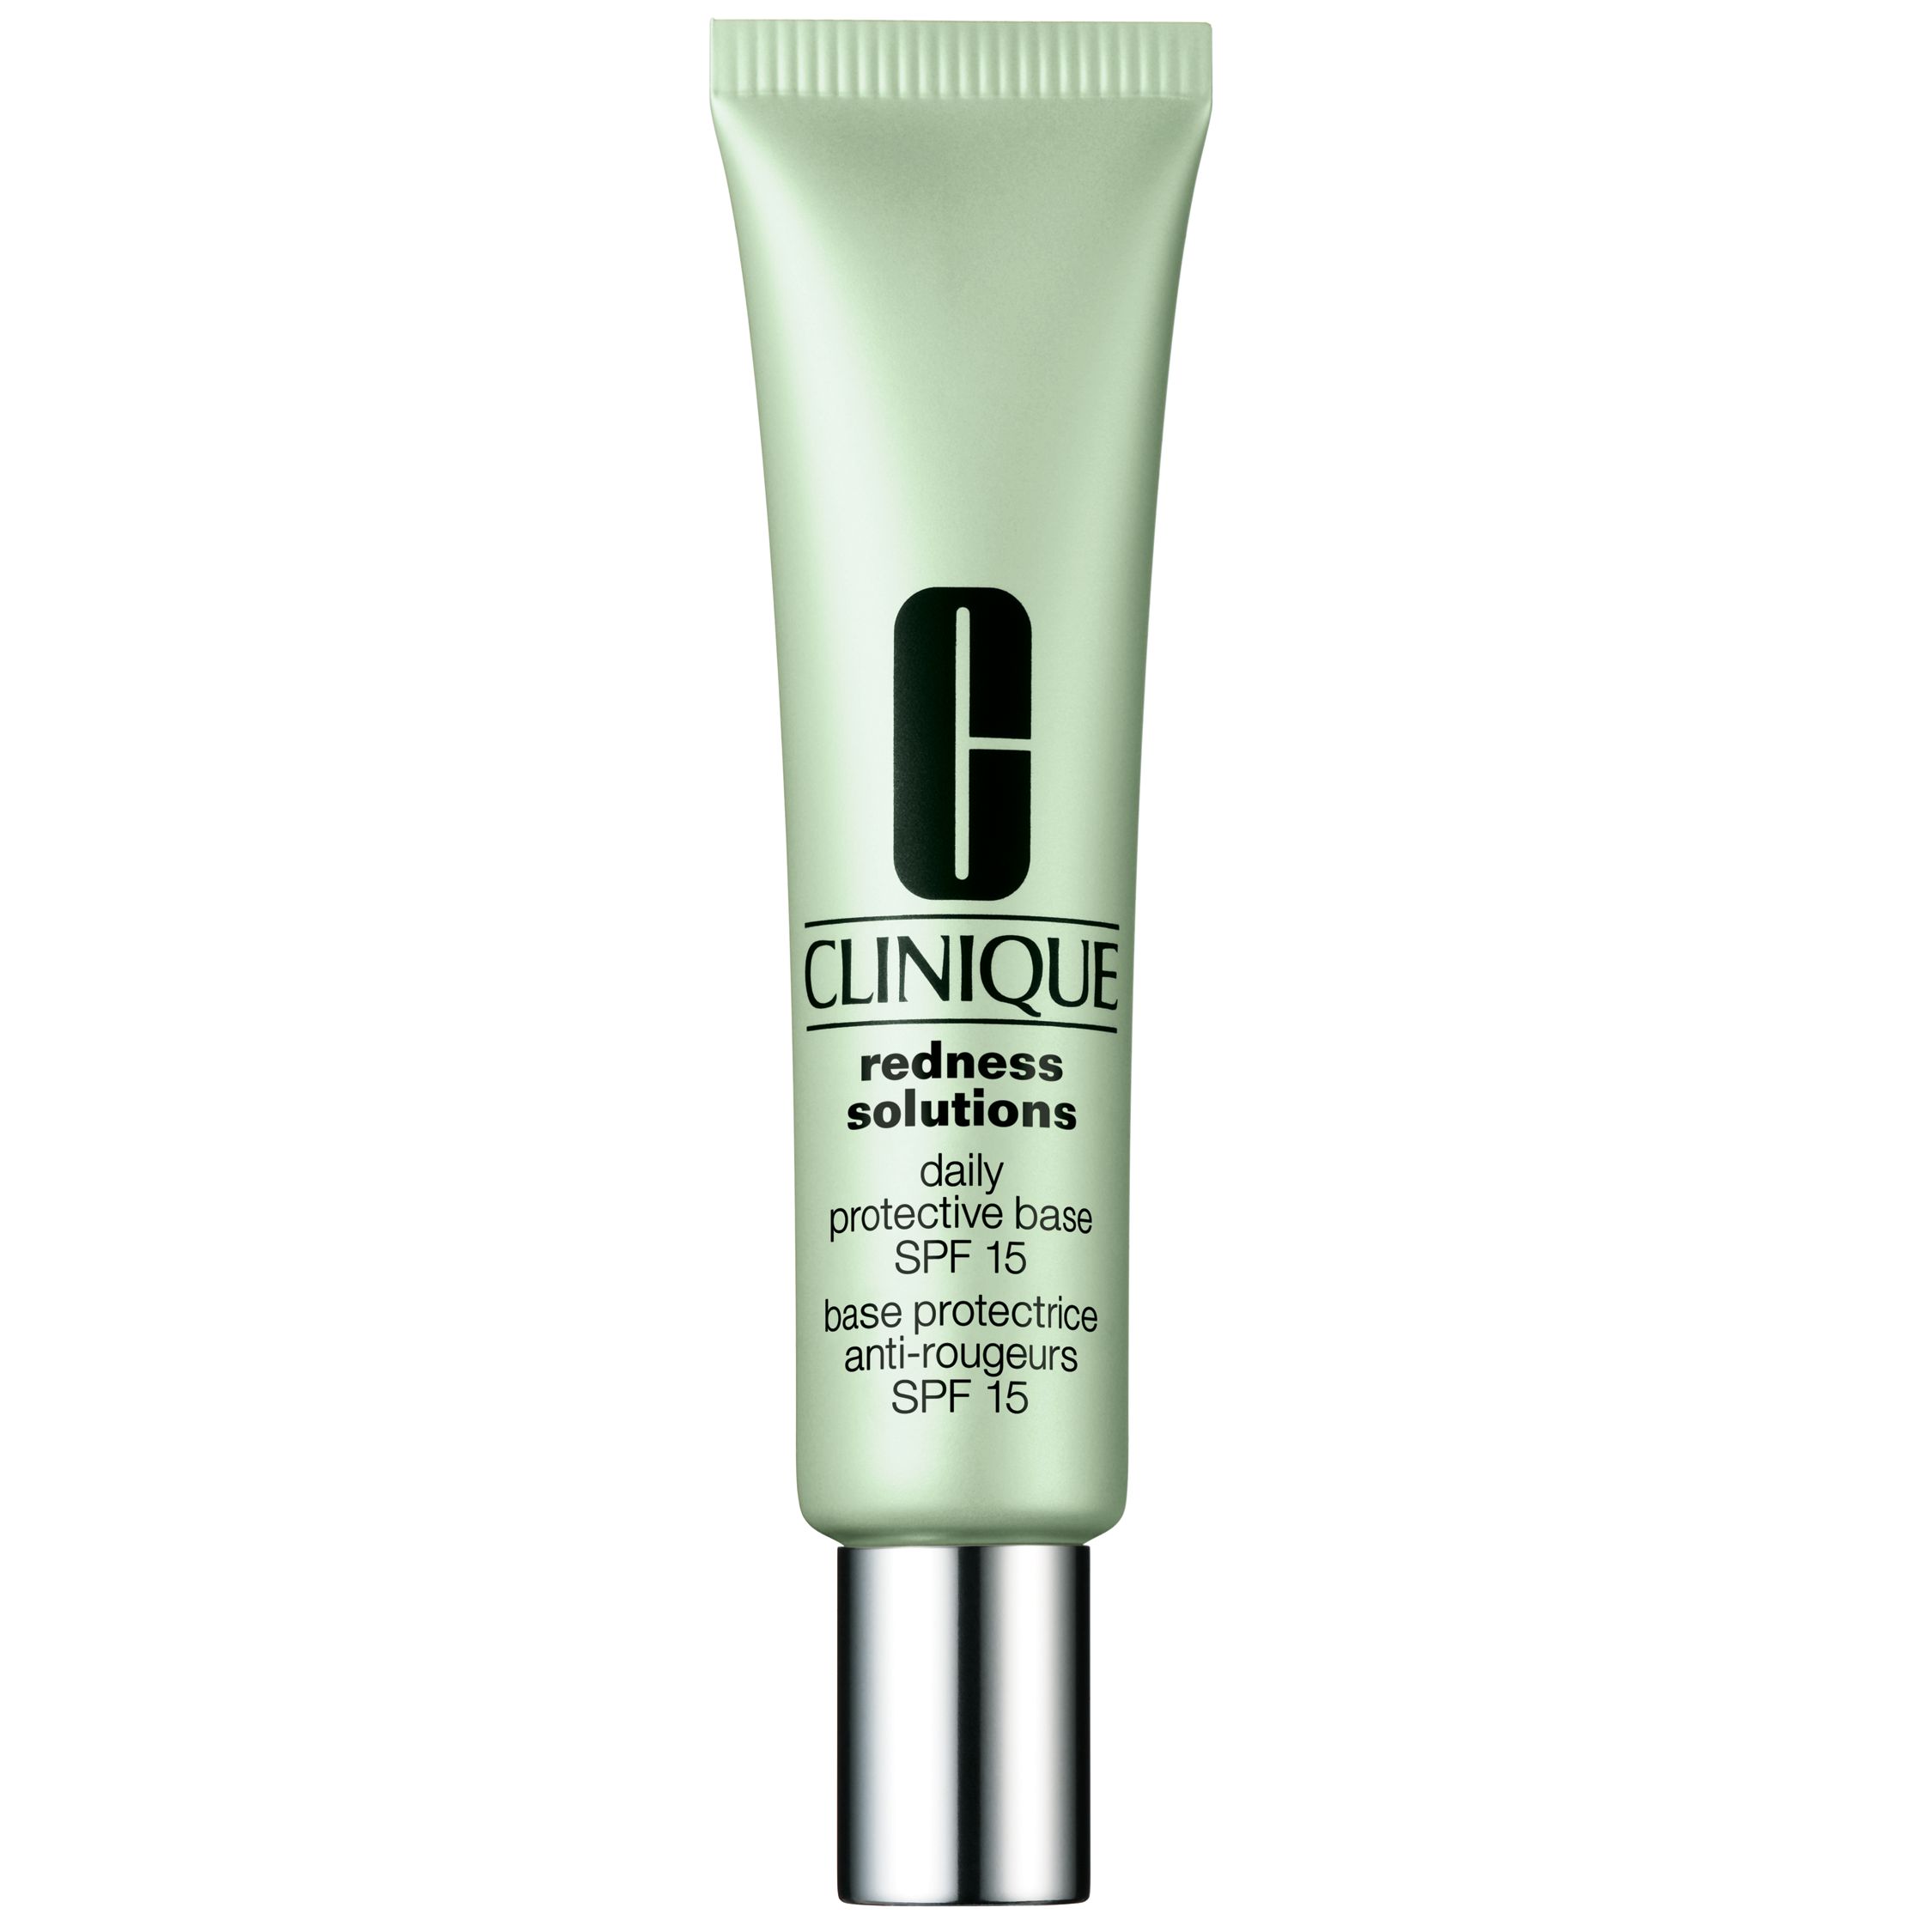 Clinique Redness Solutions Daily Protective Base SPF15 - For All Skin Types With Redness, 40ml 1